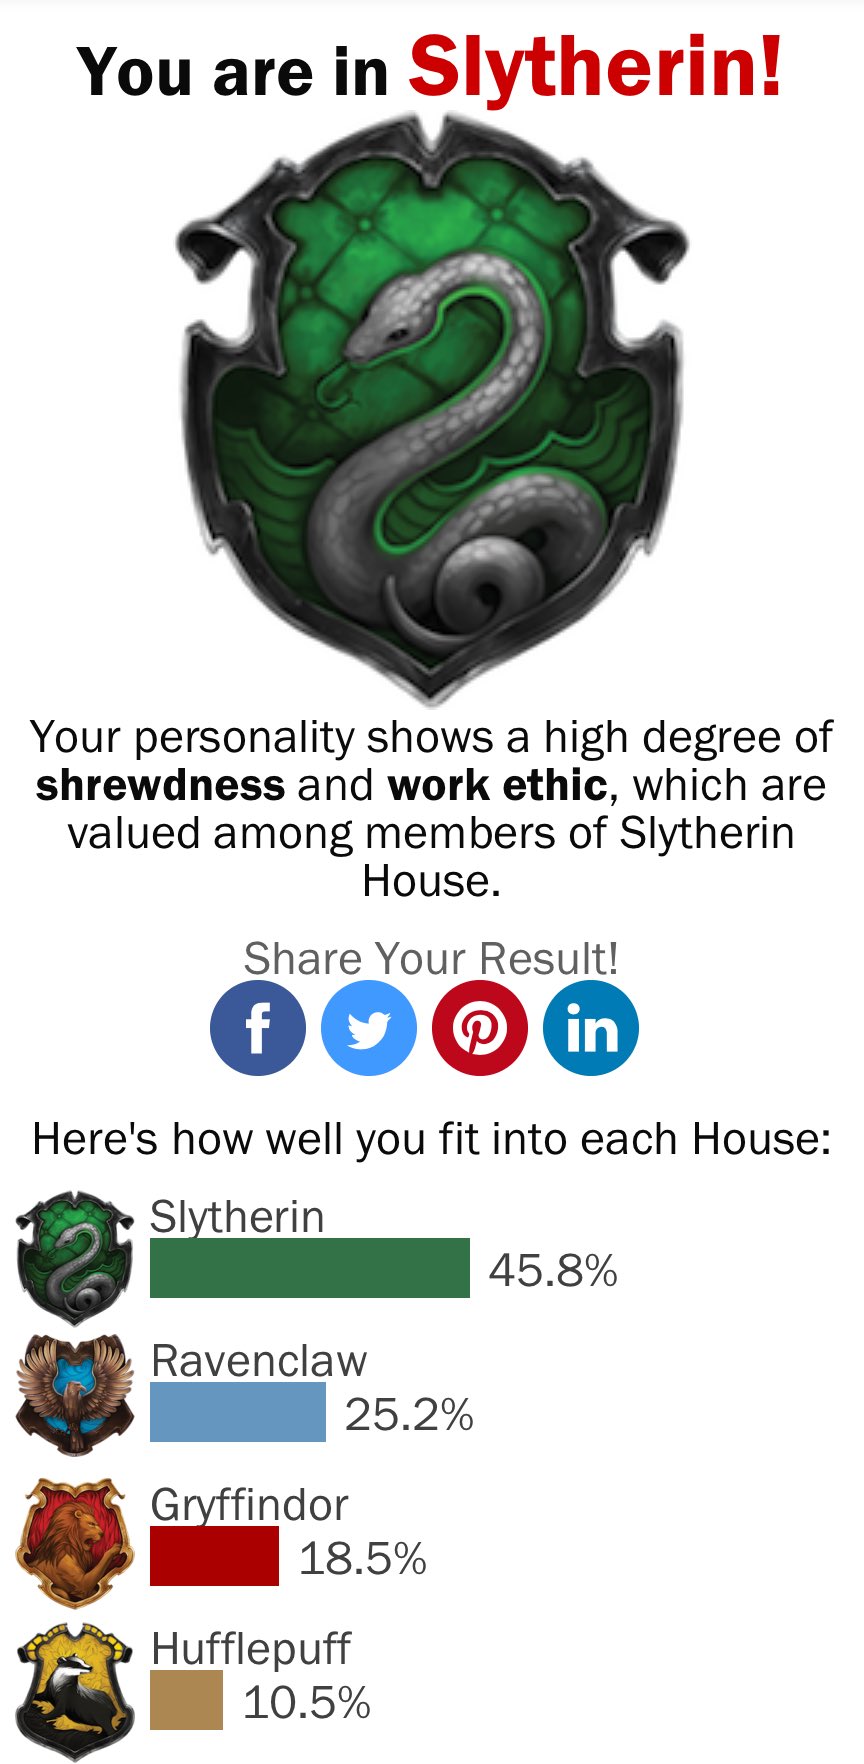 Hannah Rutherford on "The ultimate Harry quiz: Find out which you truly belong in. I'm in Slytherin! 🐍🐍🐍🐍 https://t.co/sTVuWeTuPU https://t.co/TblVEMbOsh" / Twitter